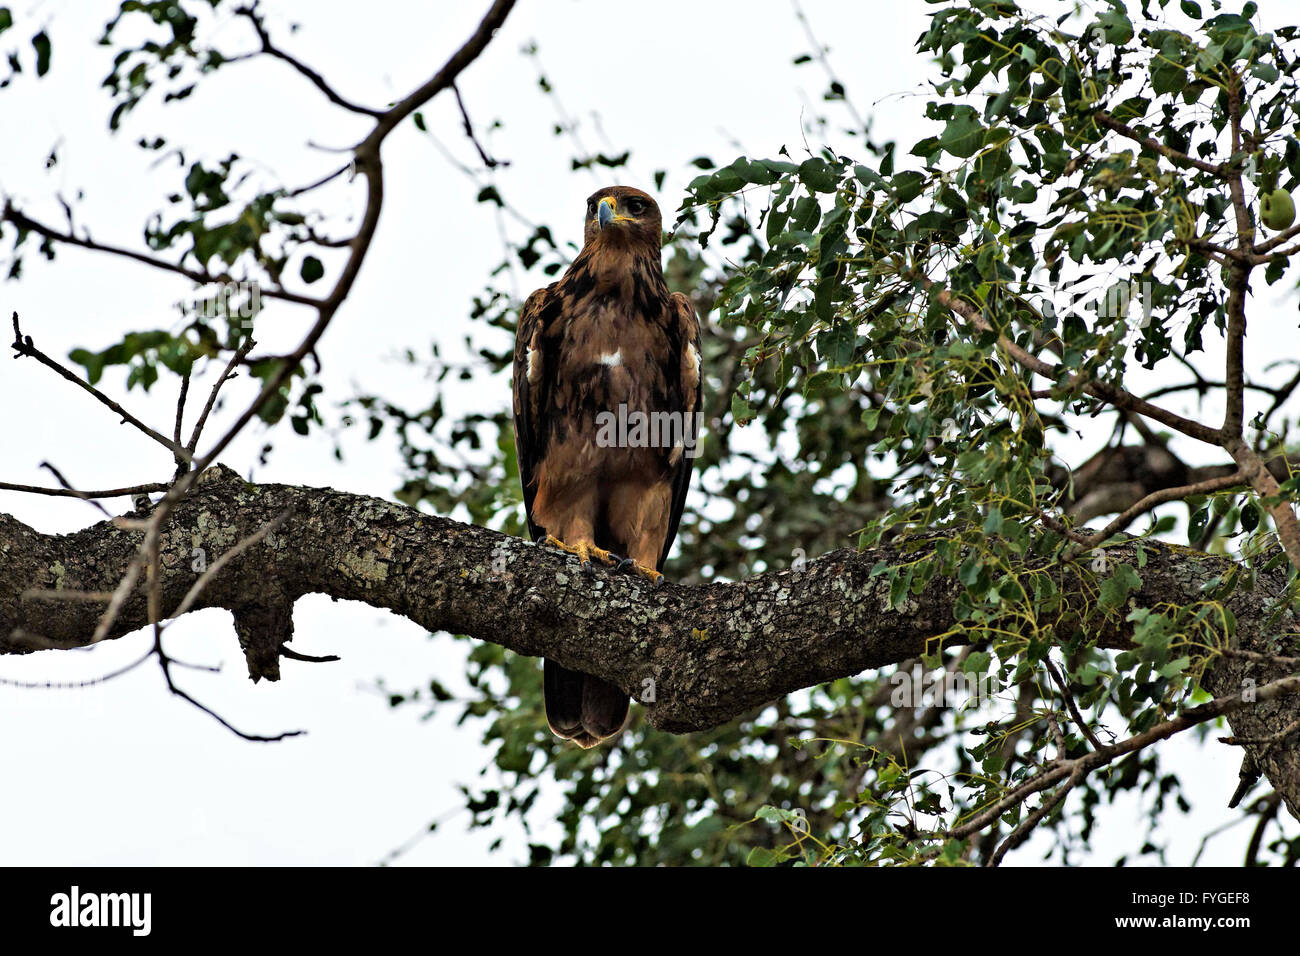 Wahlberg's Eagle ( Aquila wahlbergi ) Perched on tree branch,  Kruger National Park South Africa Stock Photo